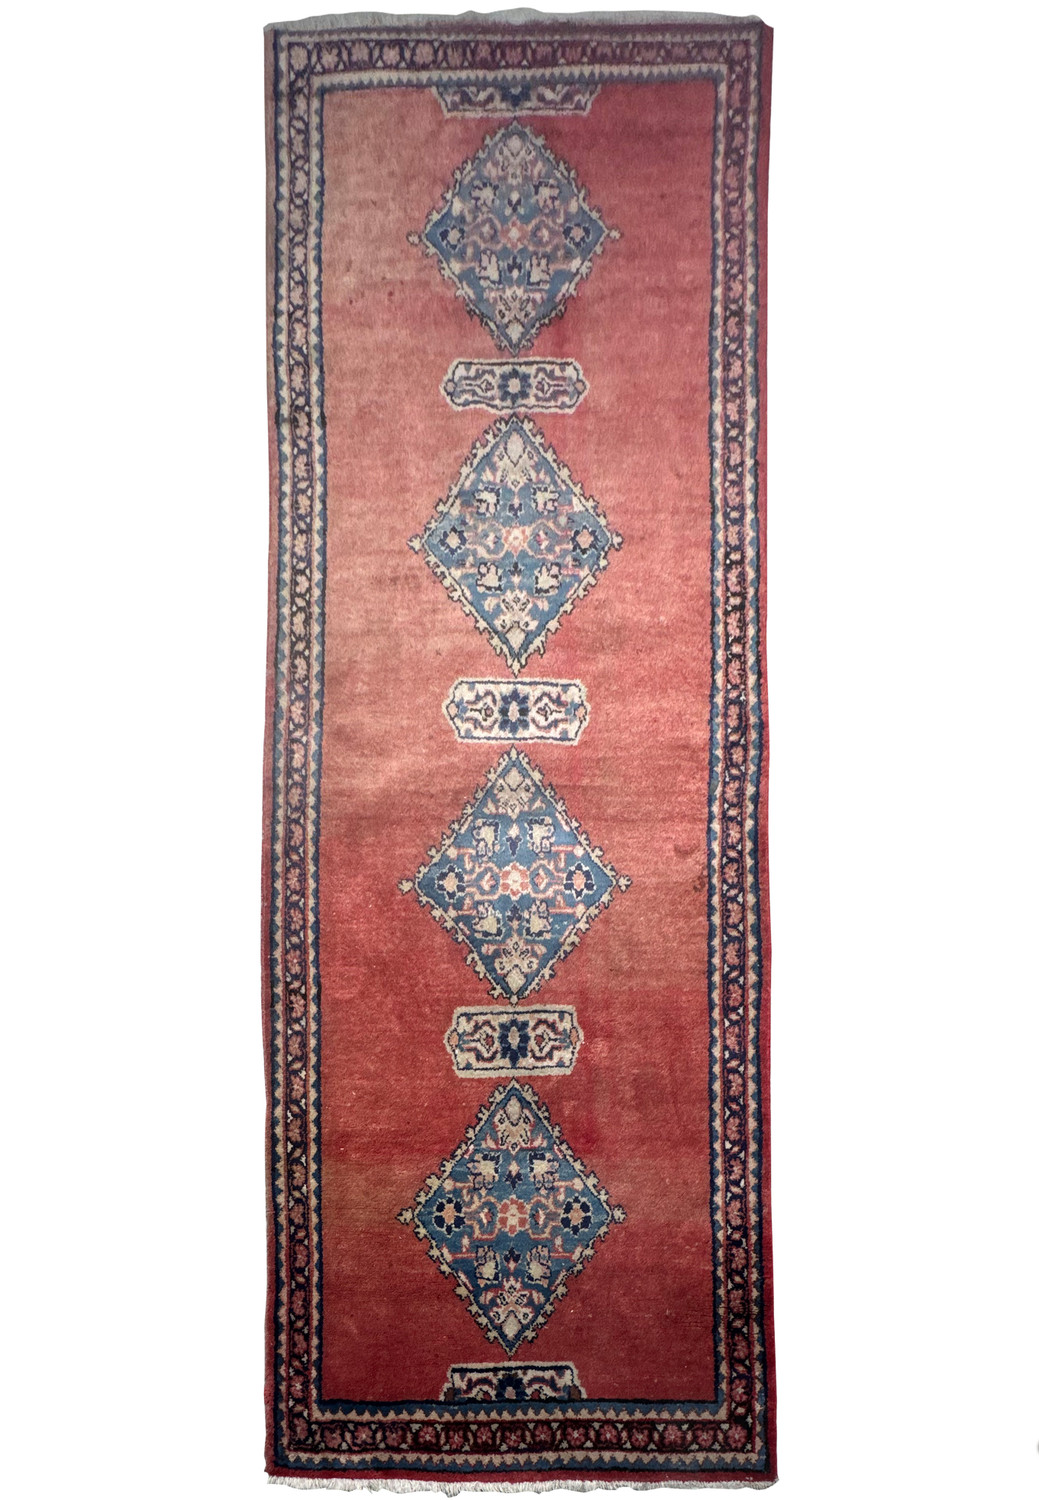 An overhead view of a Persian Hamedan runner rug with a deep red field and blue and cream medallions